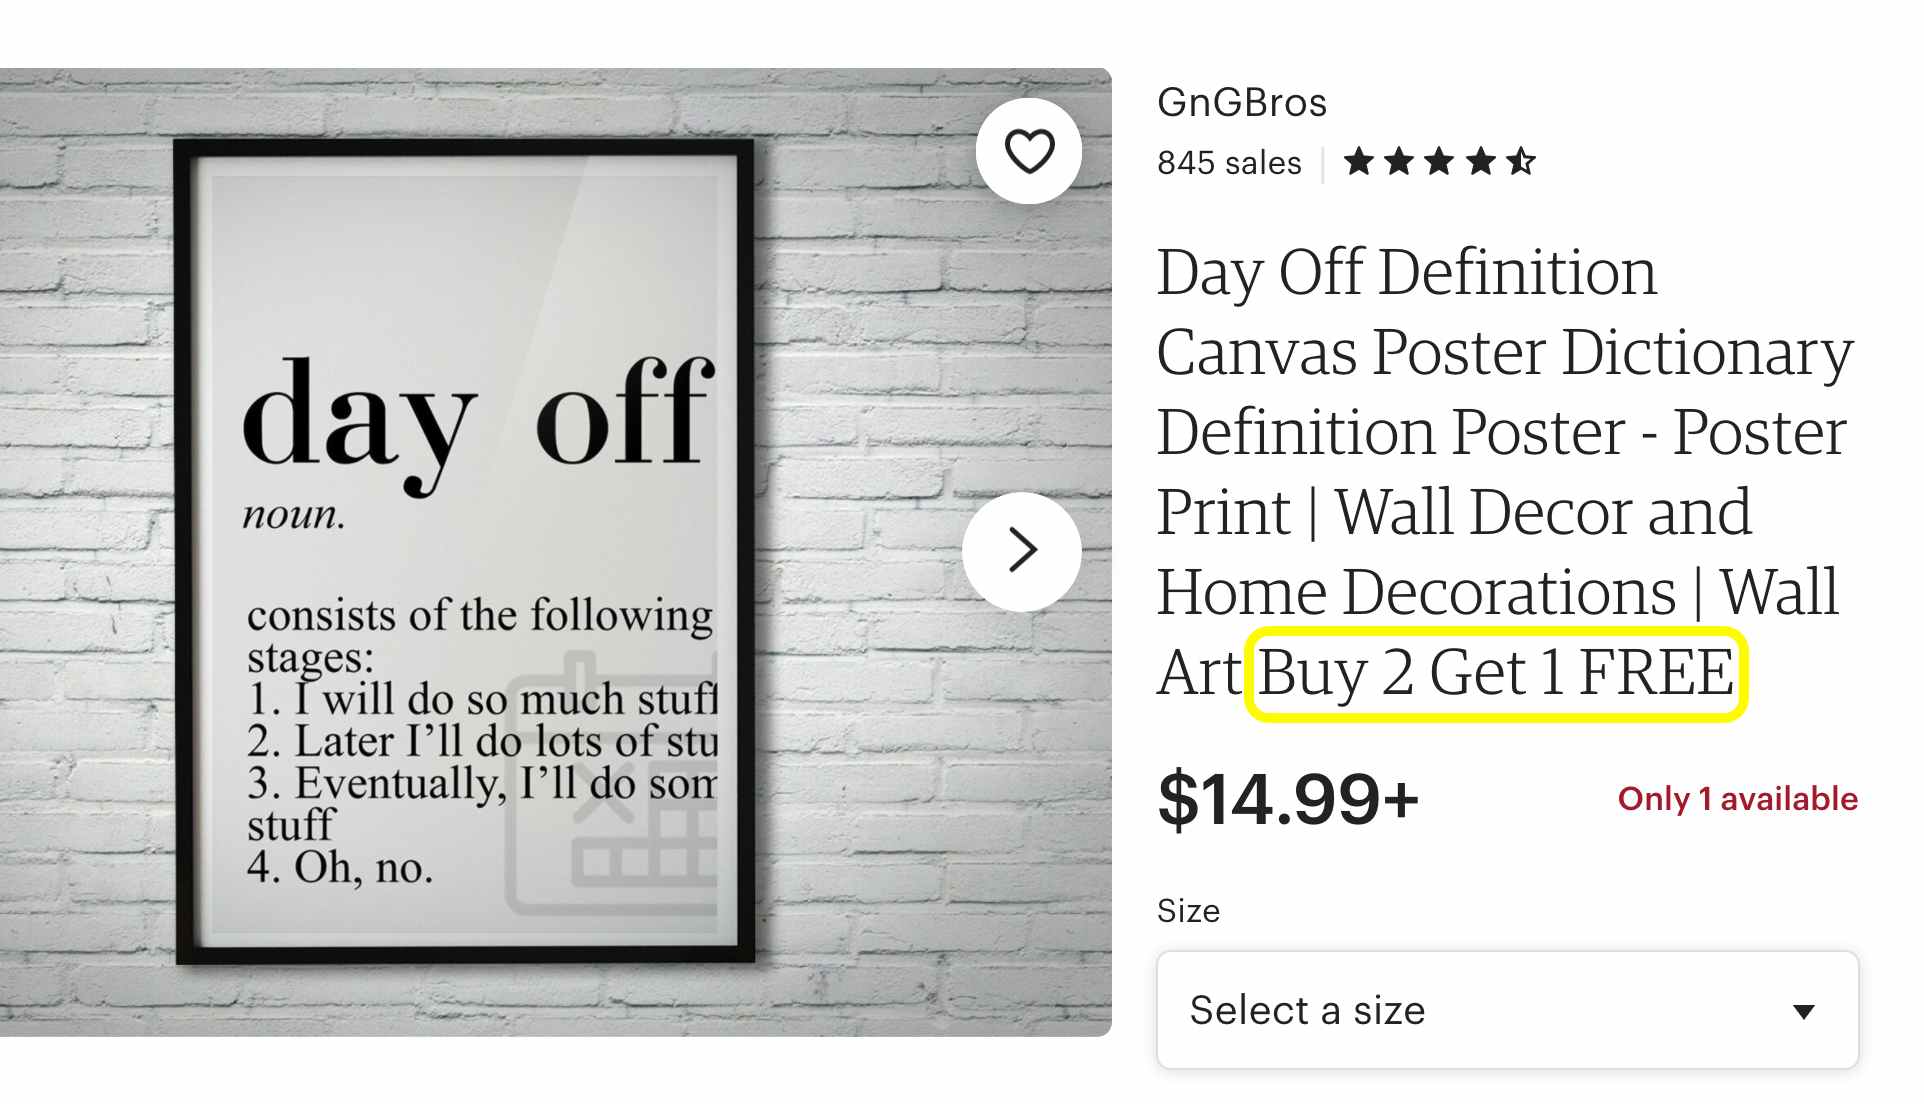 Etsy page showing a sale for buy two get one free